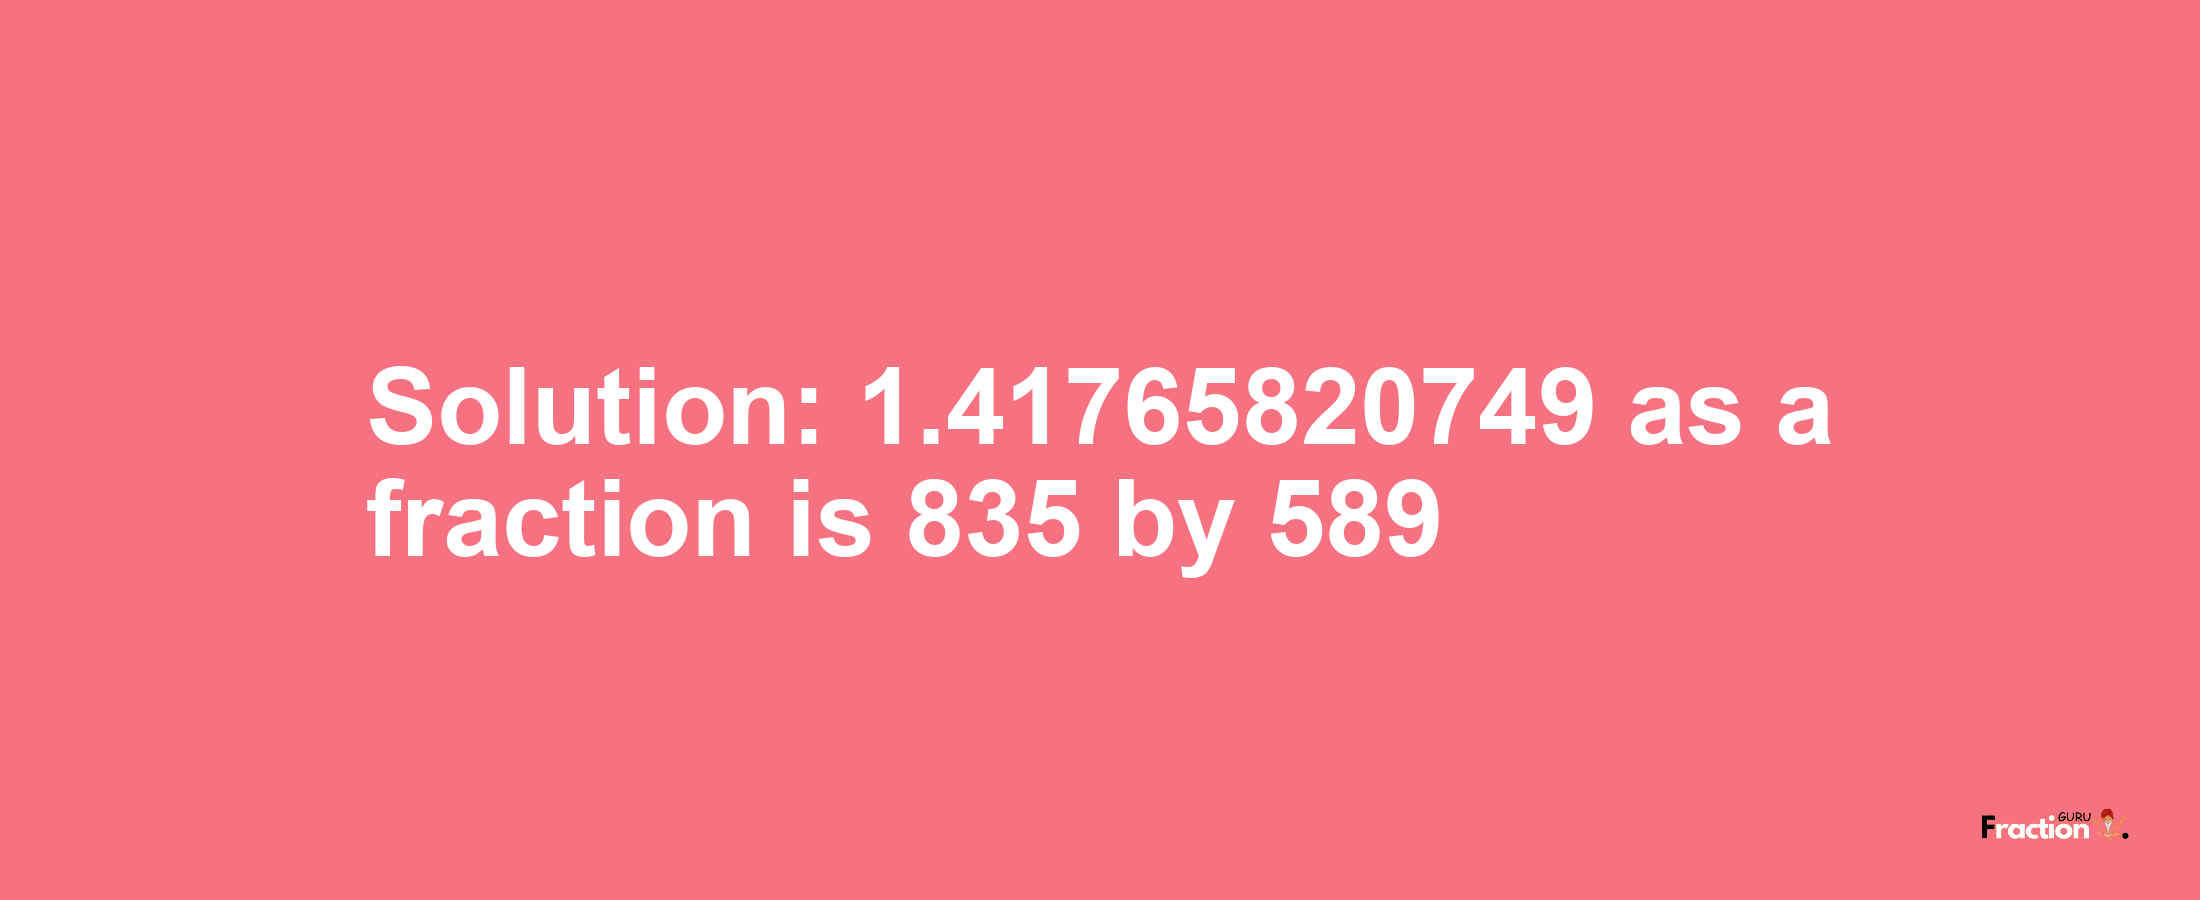 Solution:1.41765820749 as a fraction is 835/589